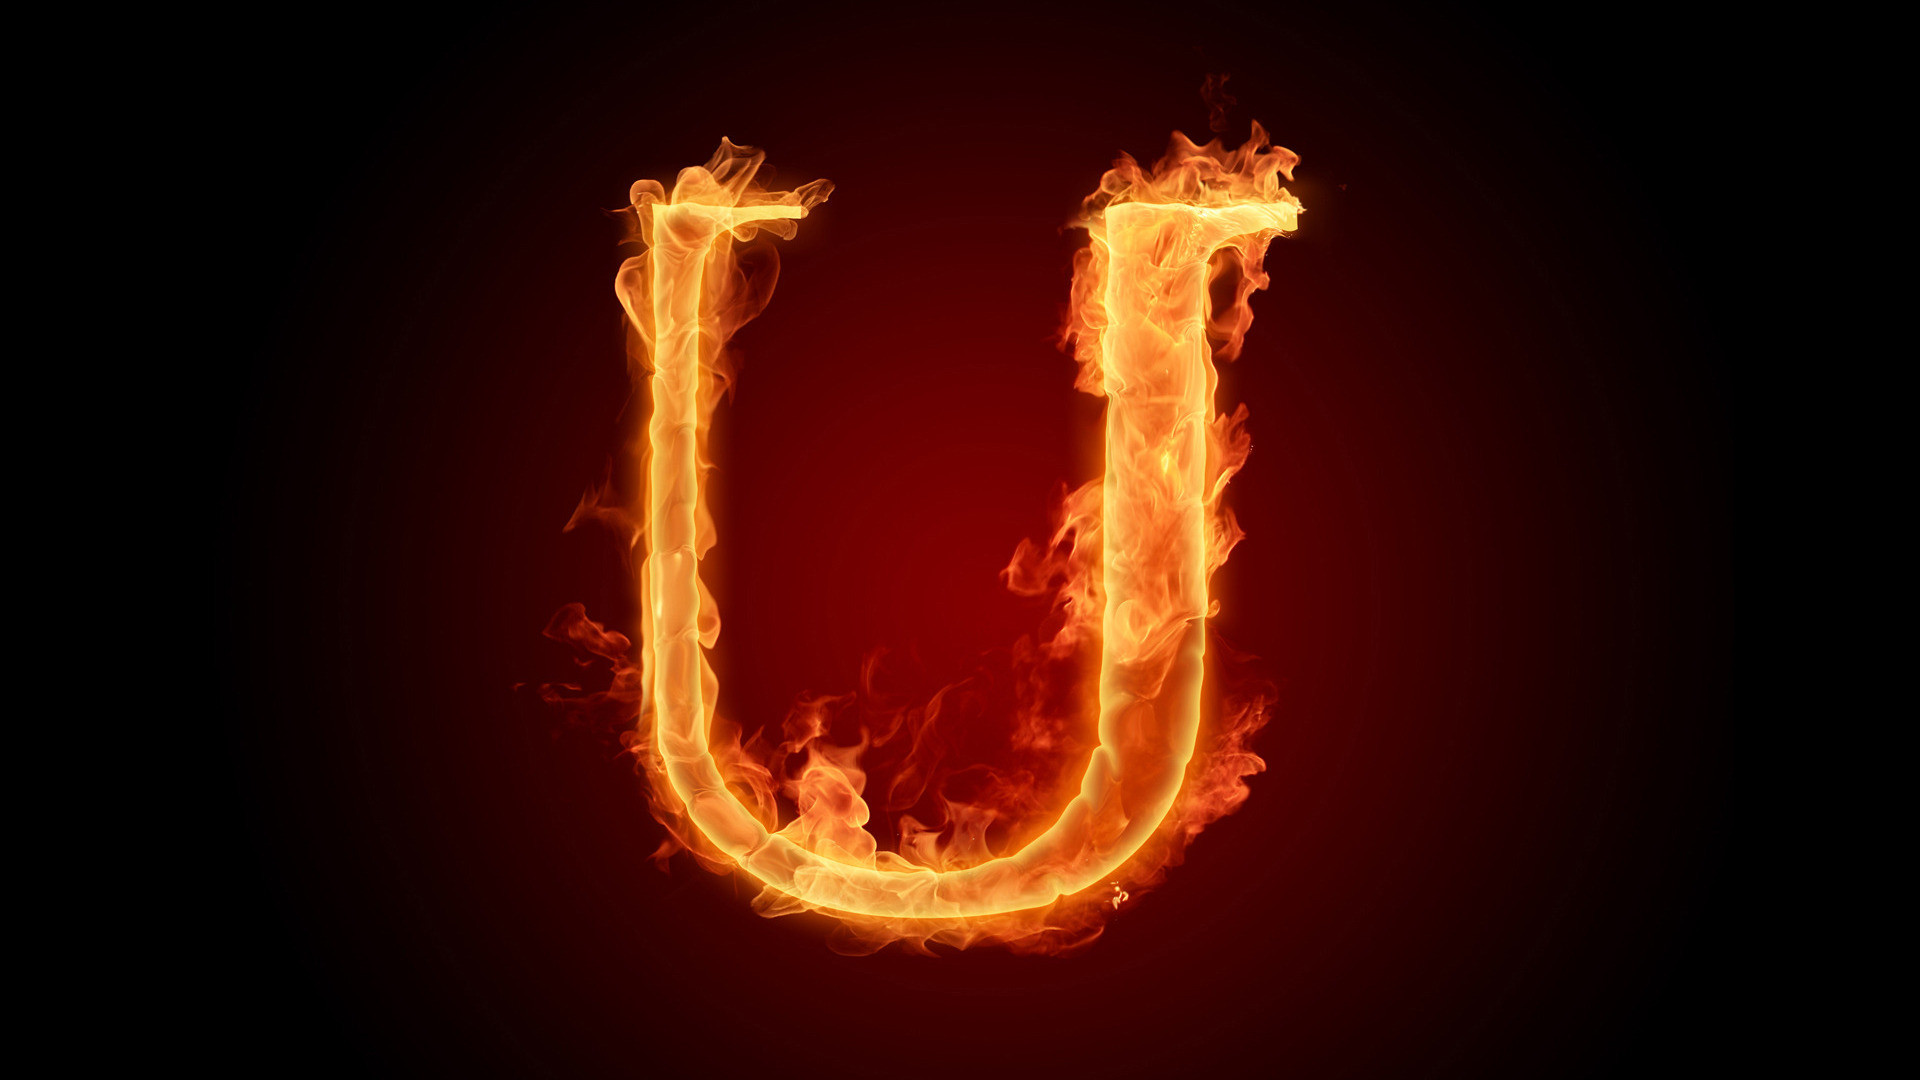 1920x1080 latest flaming letter u hd aesthetic wallpaper free download flaming with letter  wallpaper.